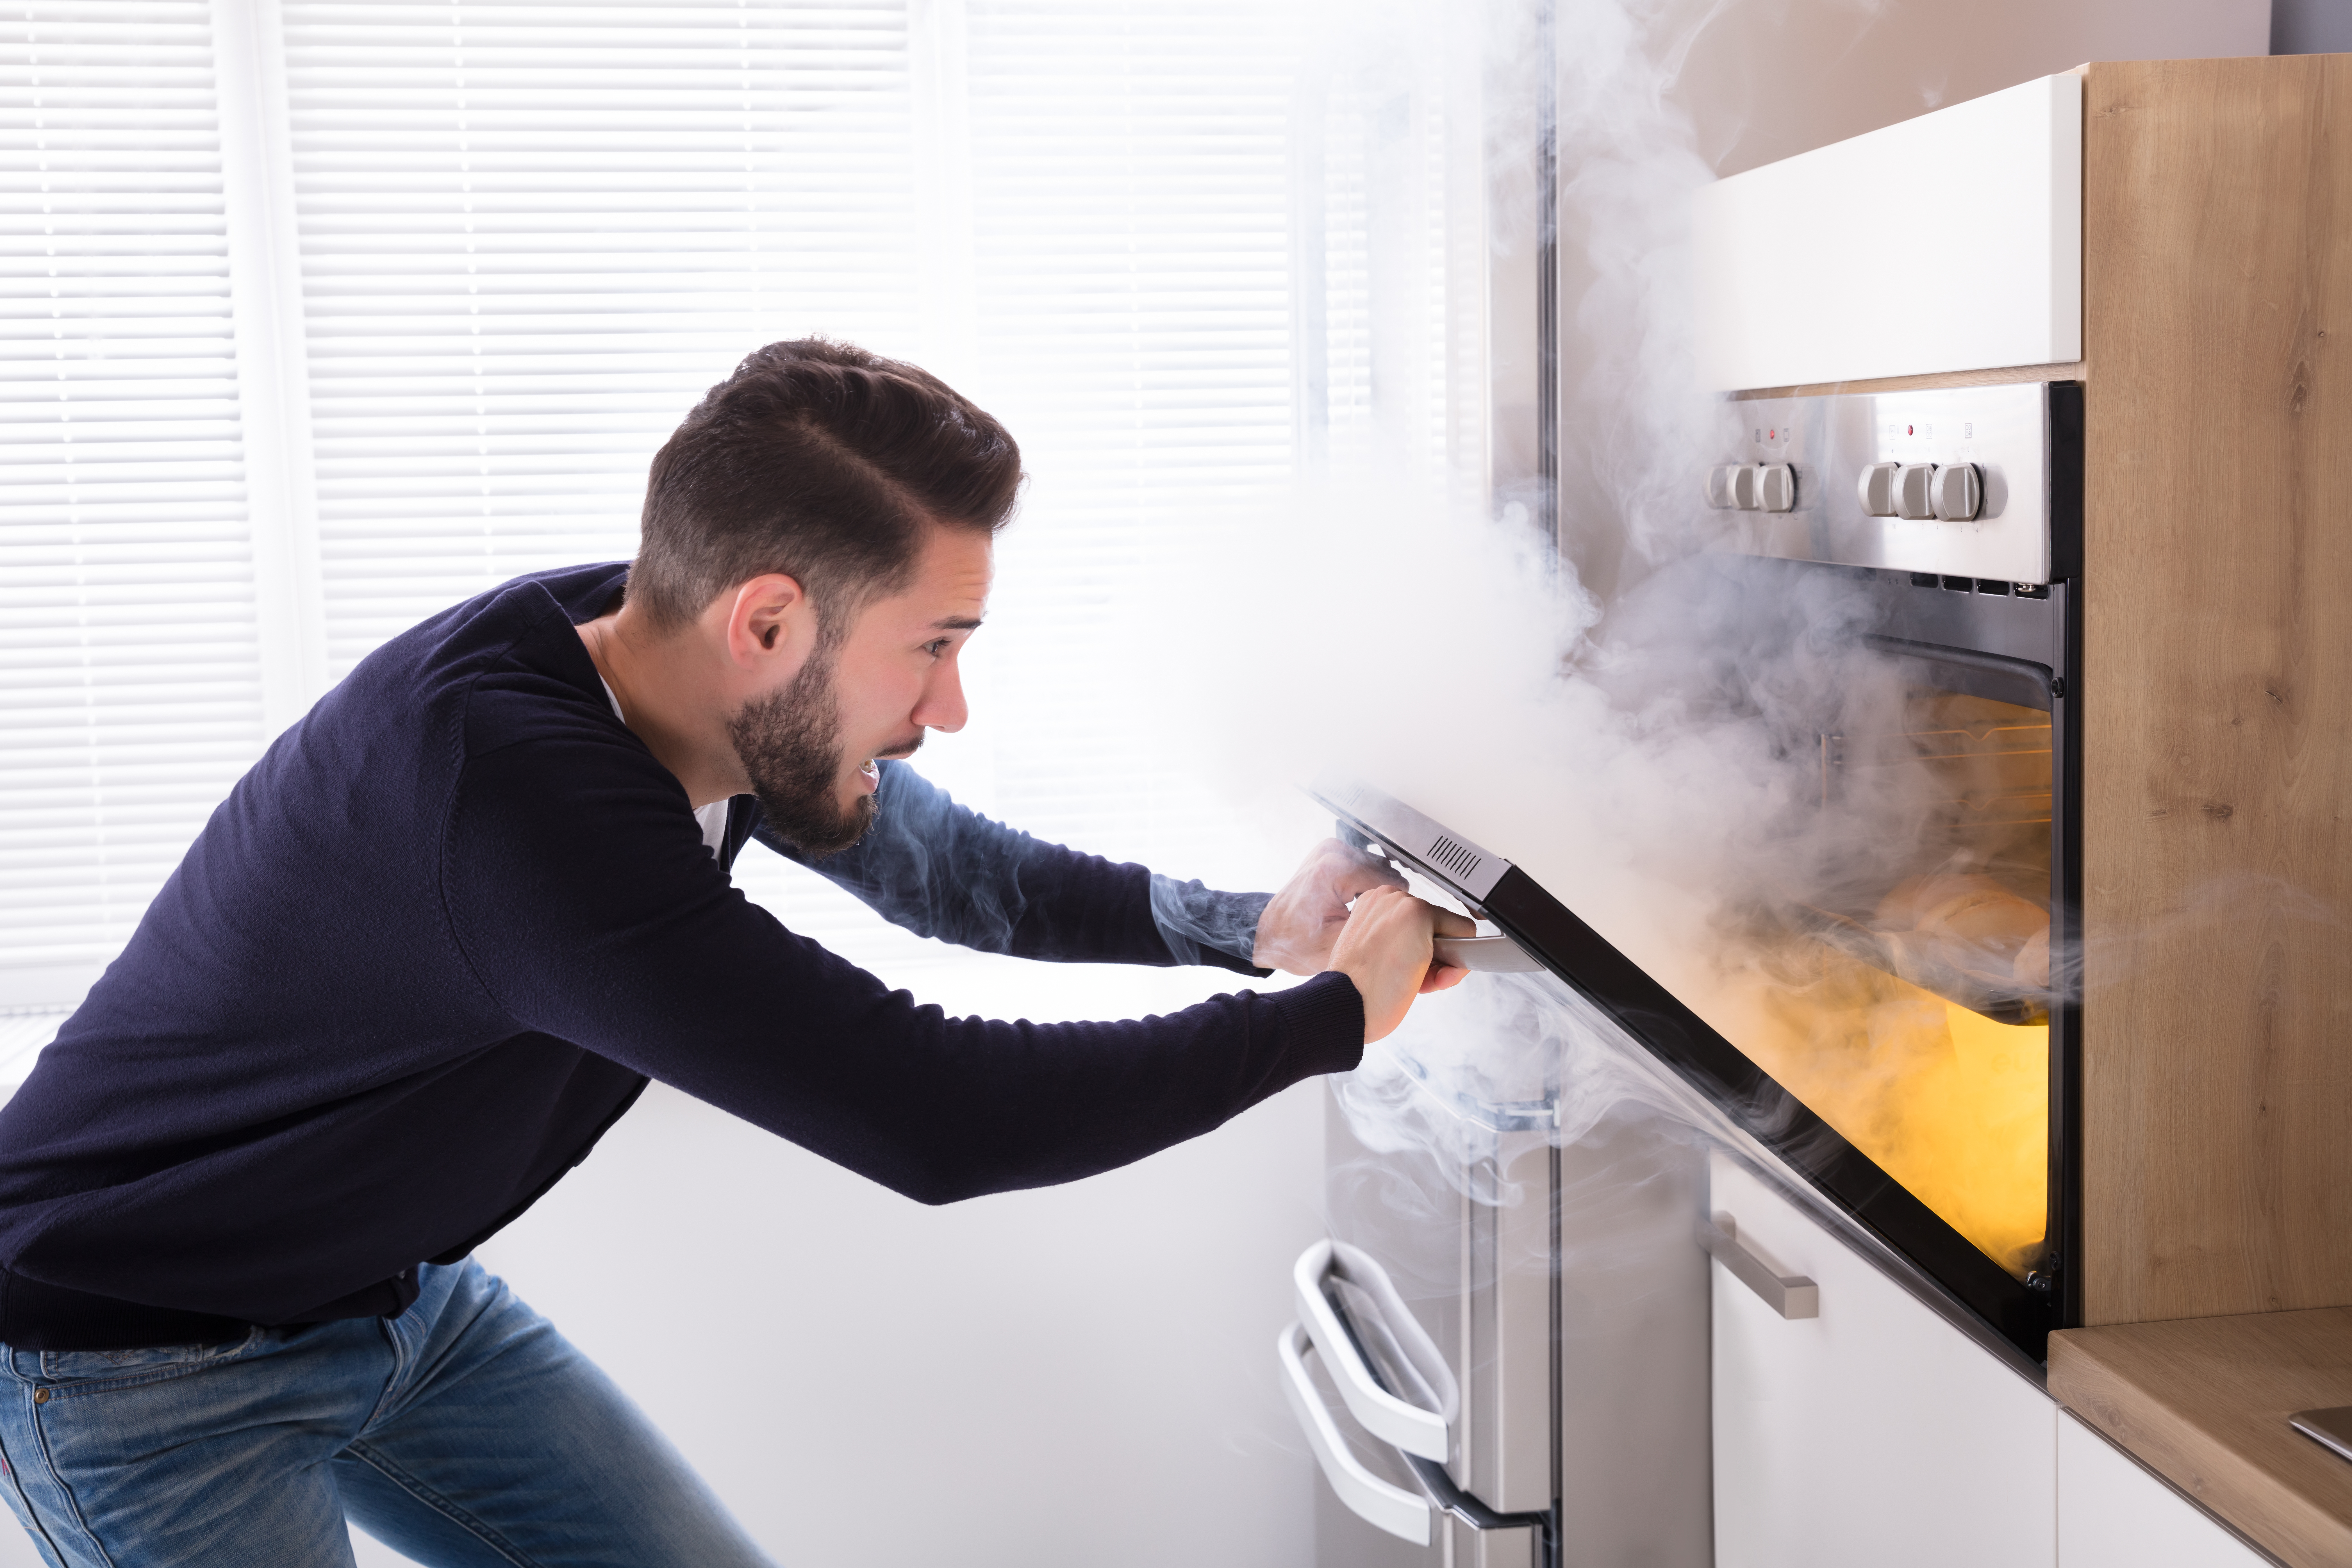 When it's time for a new oven: Samsung, Whirlpool, LG, or GE?